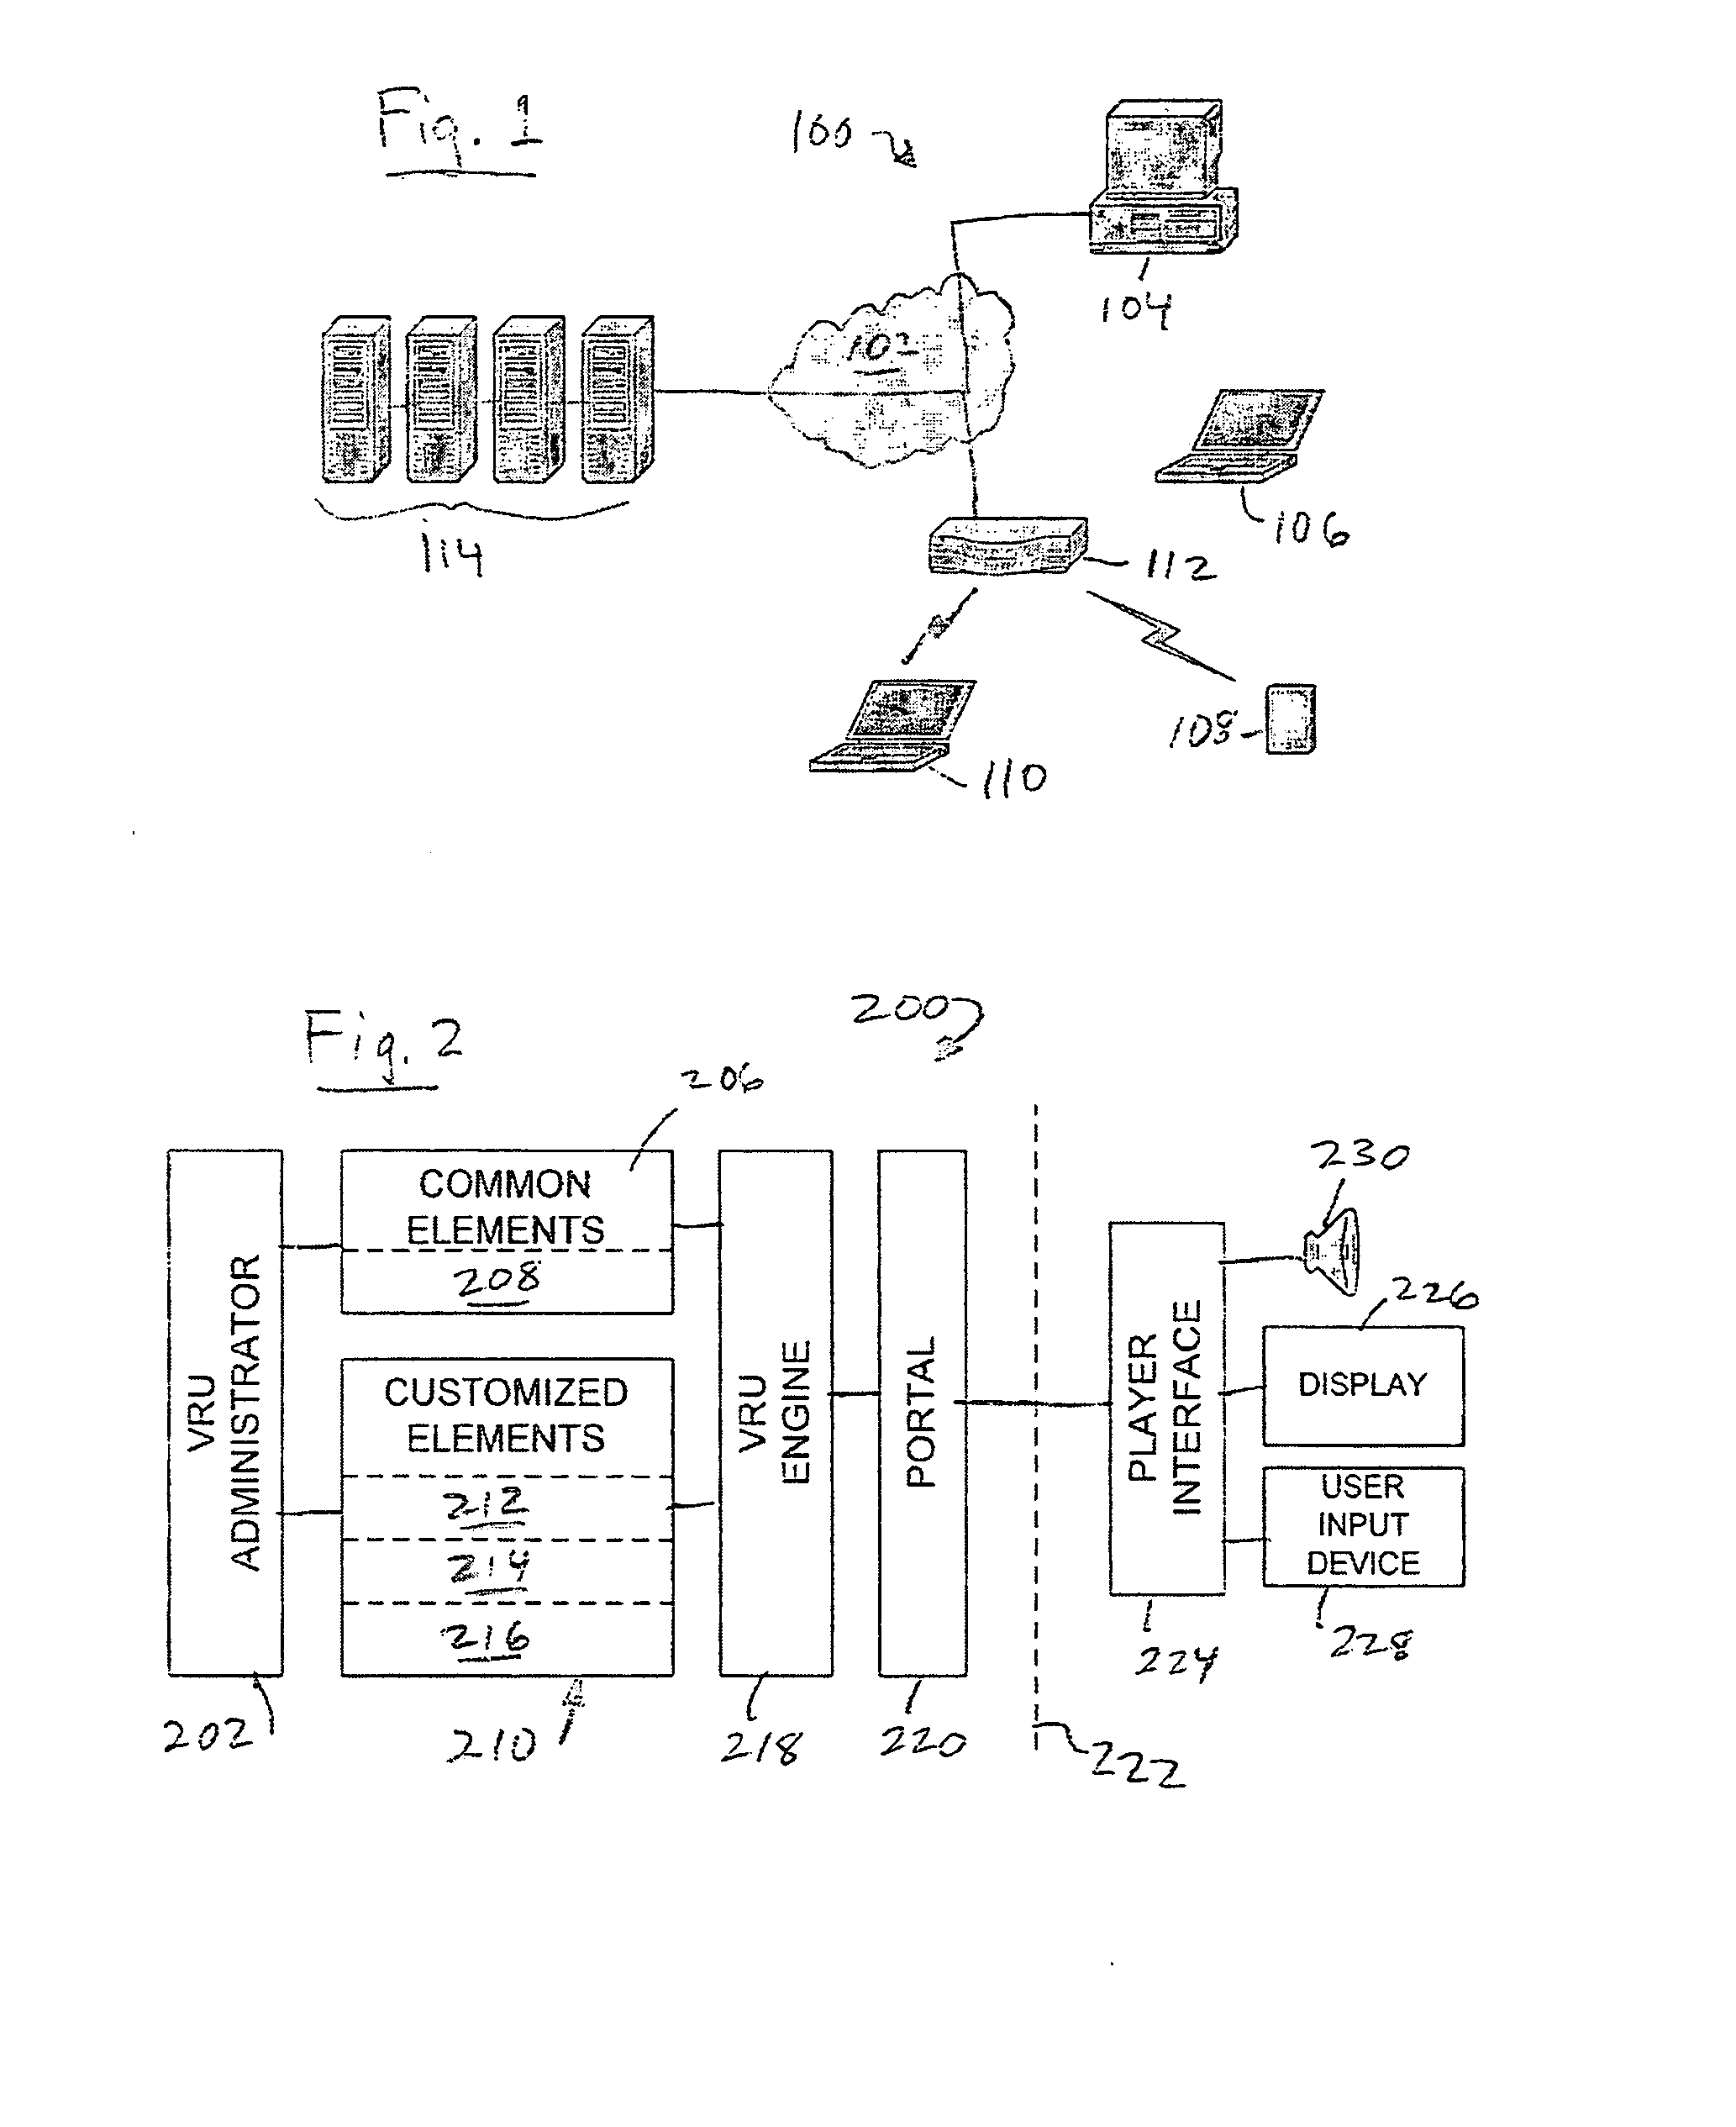 Animation control method for multiple participants